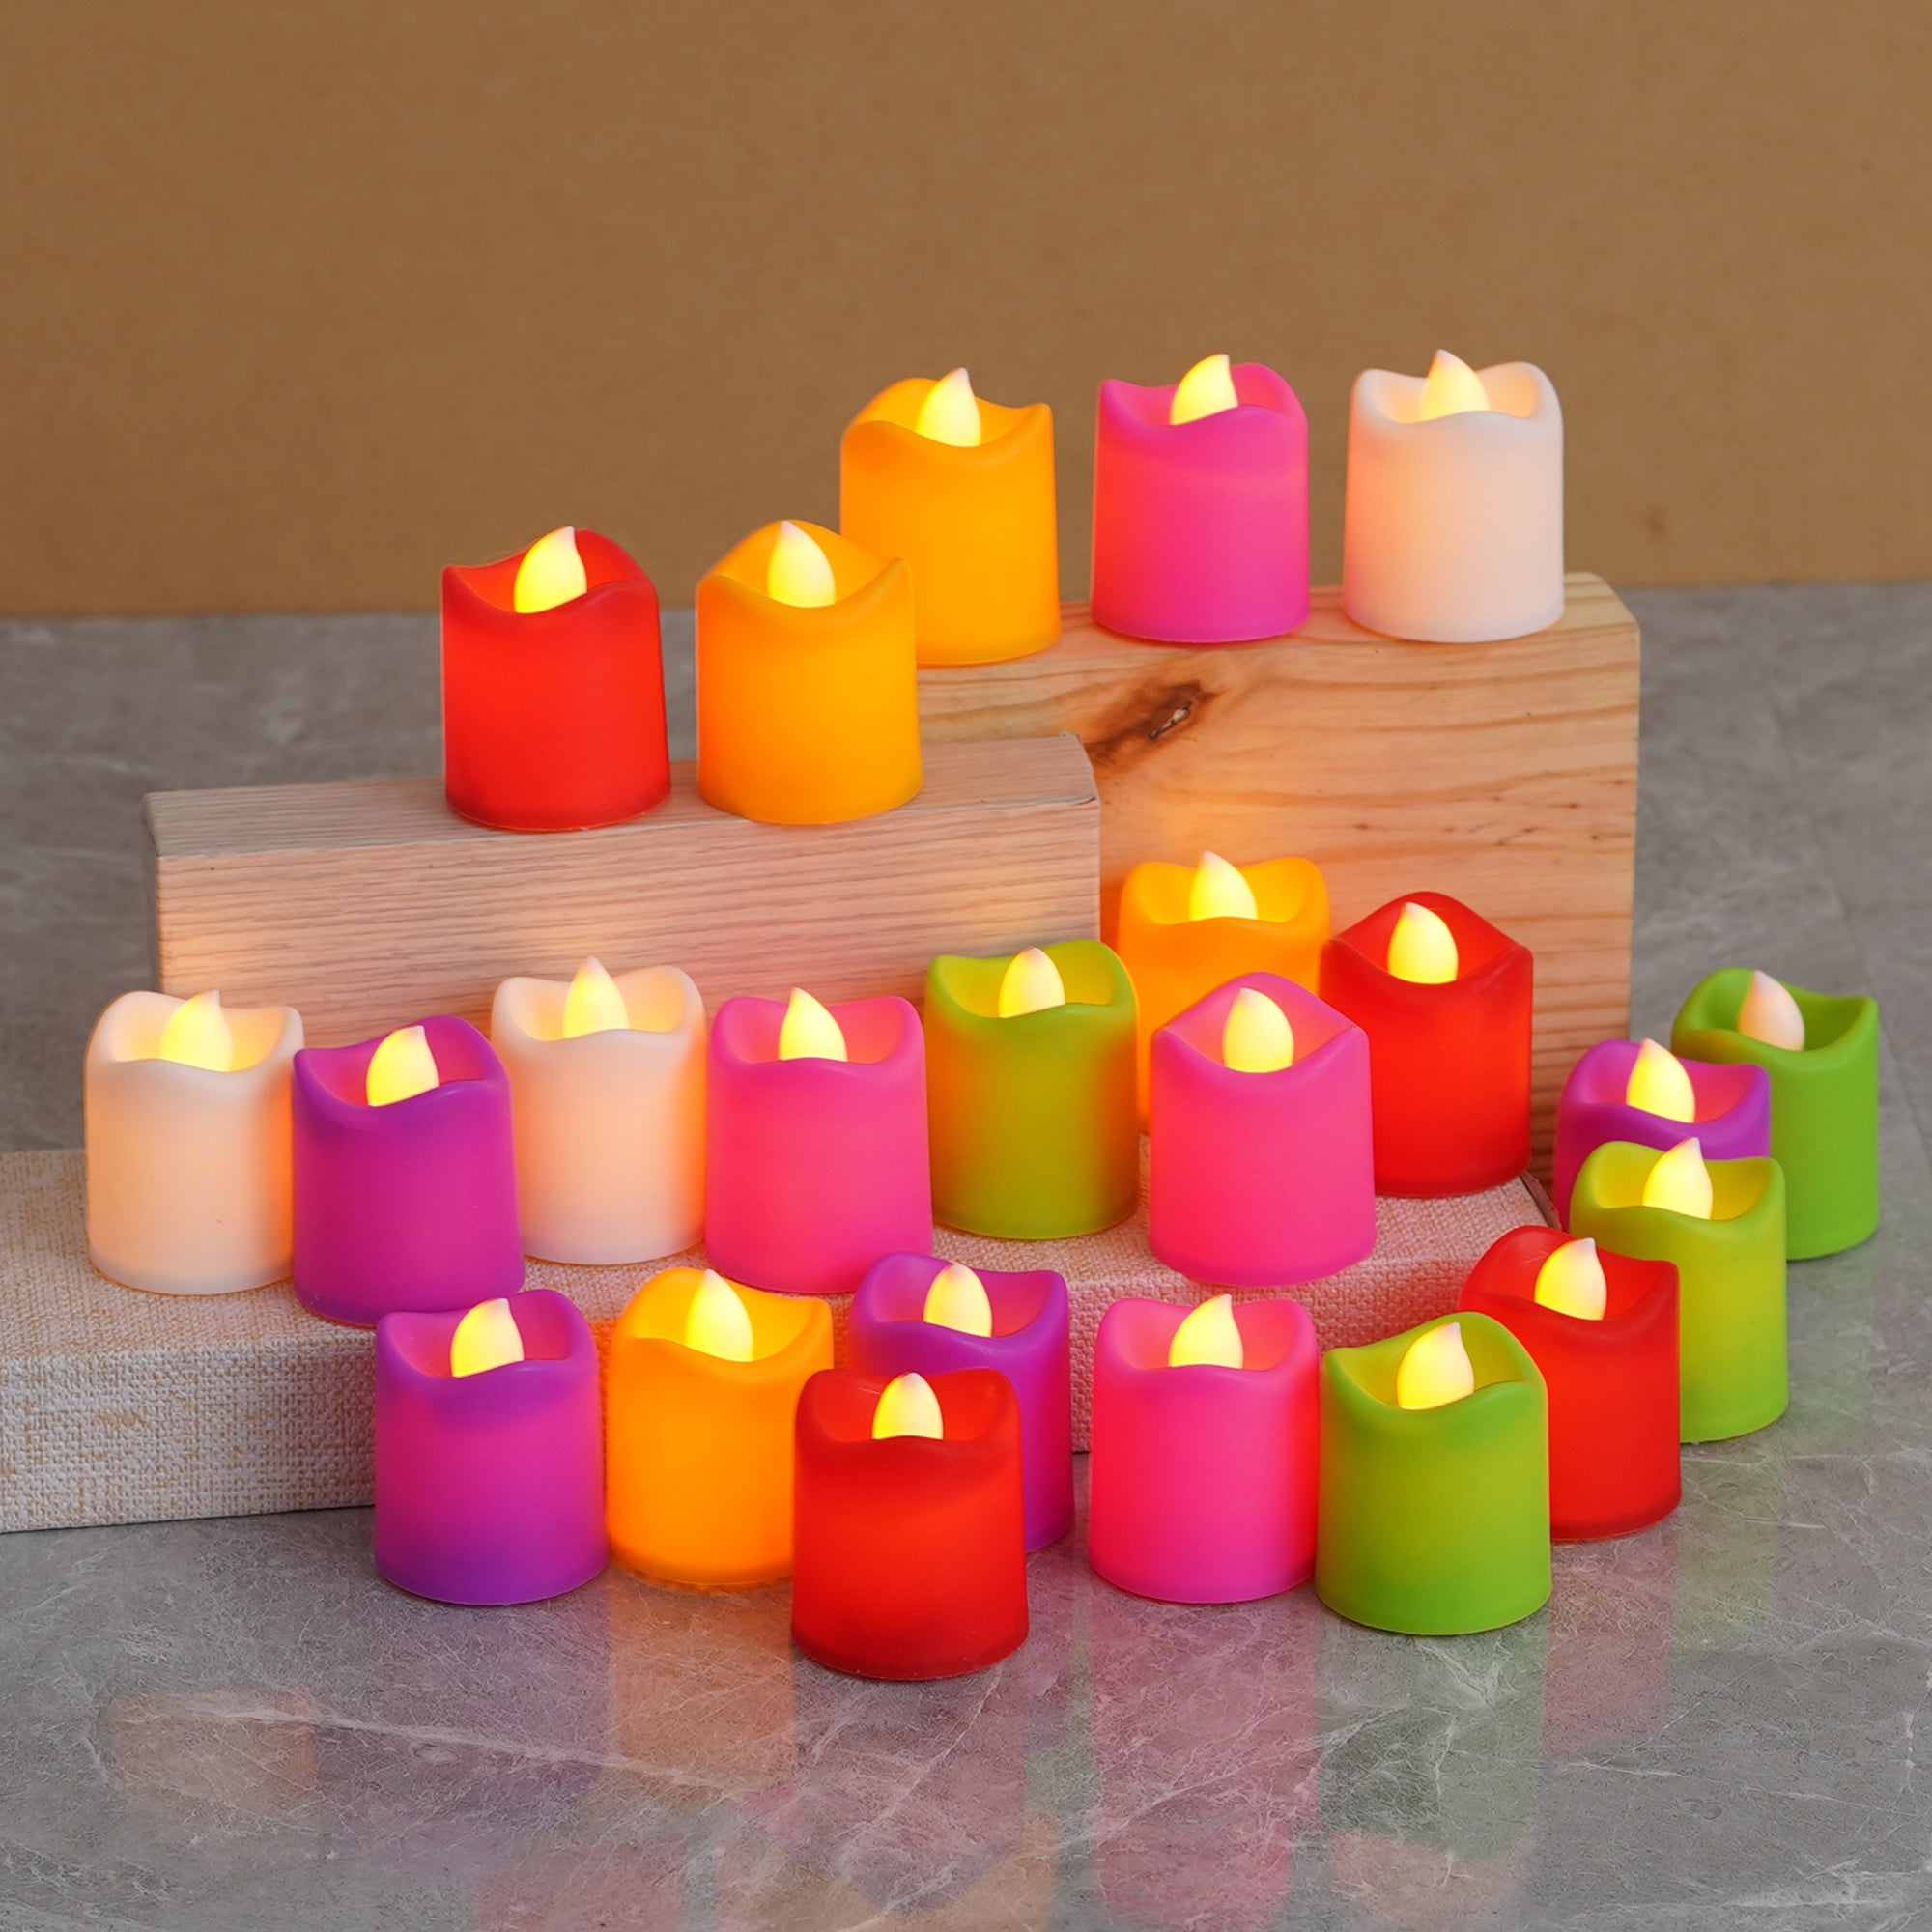 eCraftIndia Multicolor Flameless and Smokeless LED Tea Light Candles for Home Decoration (Set of 24)